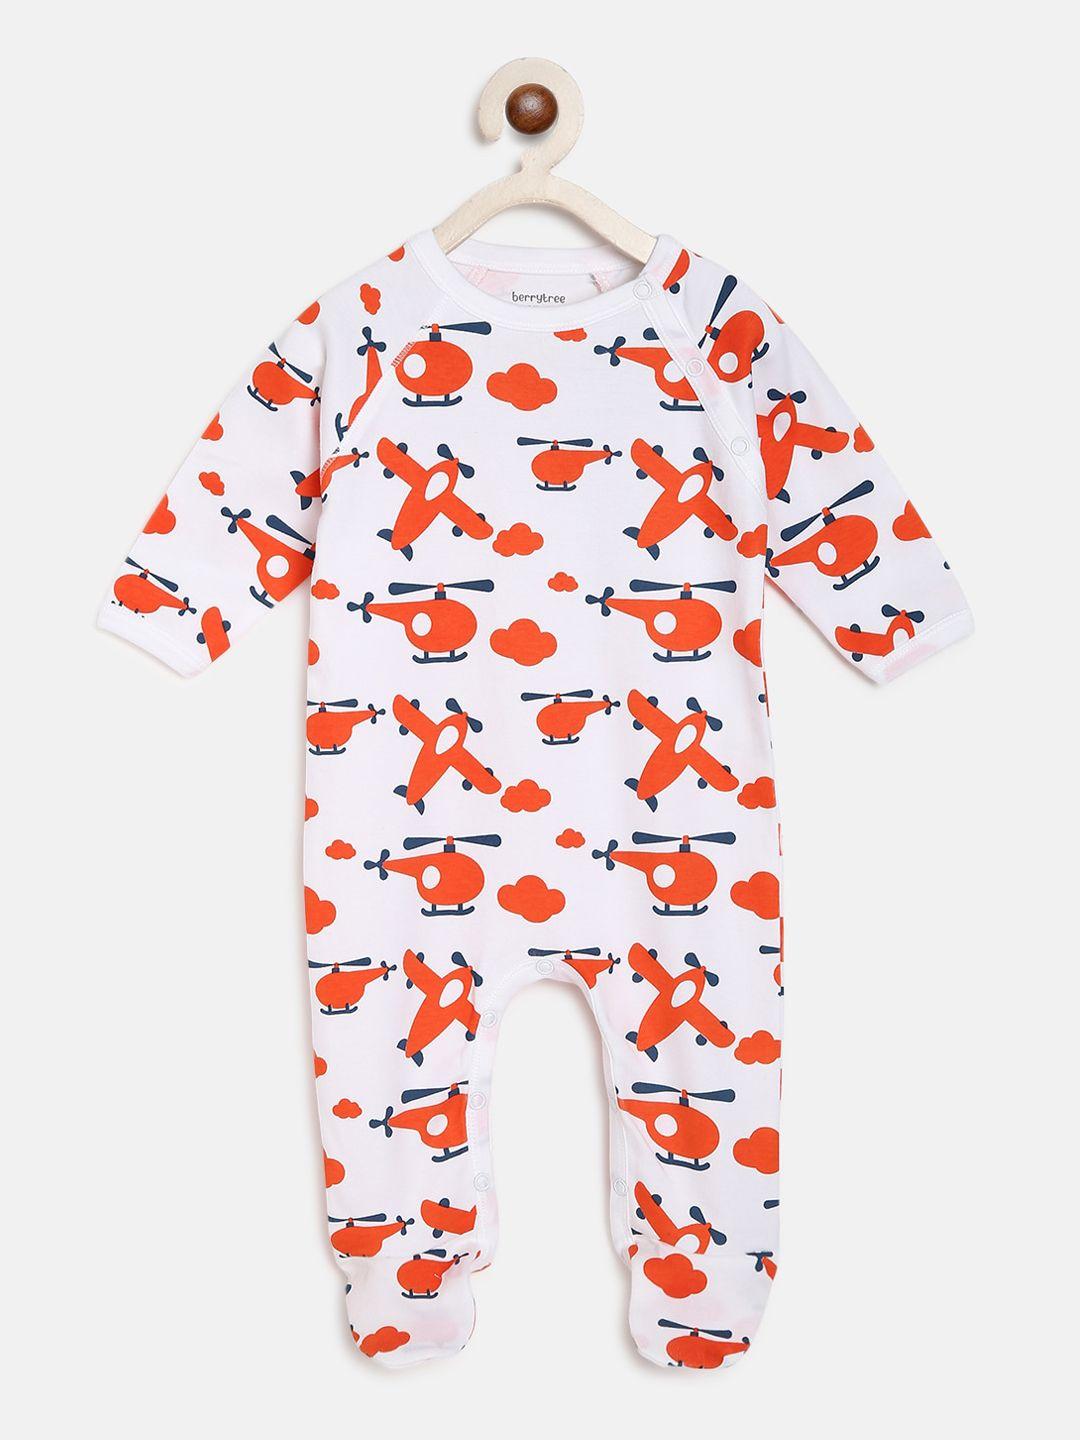 berrytree kids orange & white printed organic cotton sustainable rompers